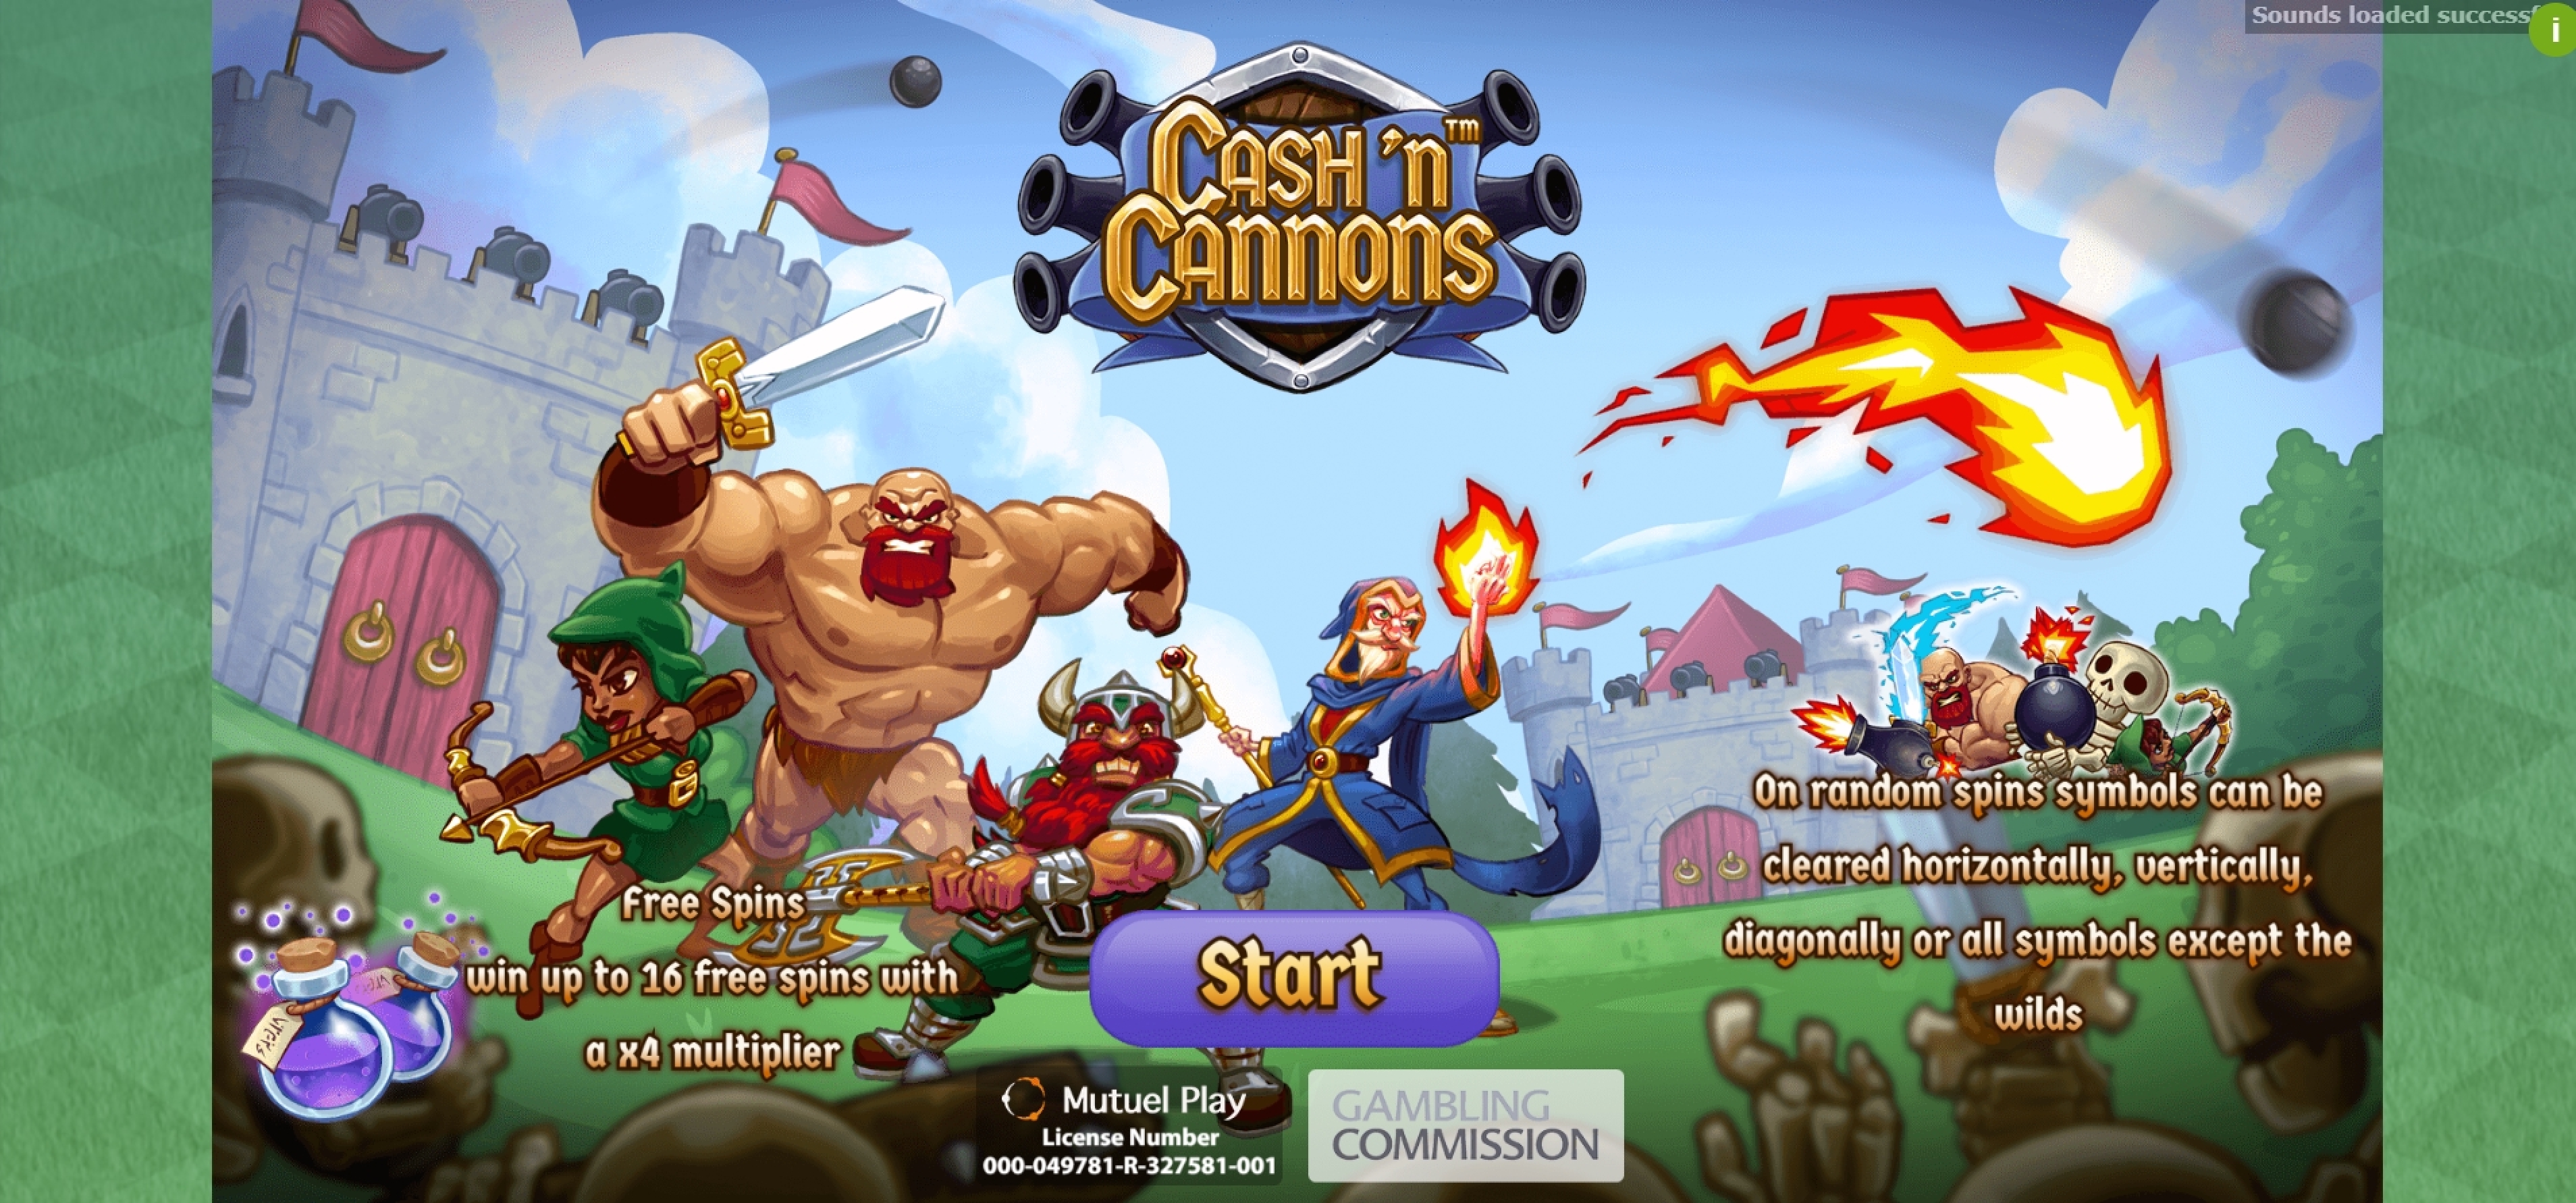 Play Cash 'n Cannons Free Casino Slot Game by Mutuel Play